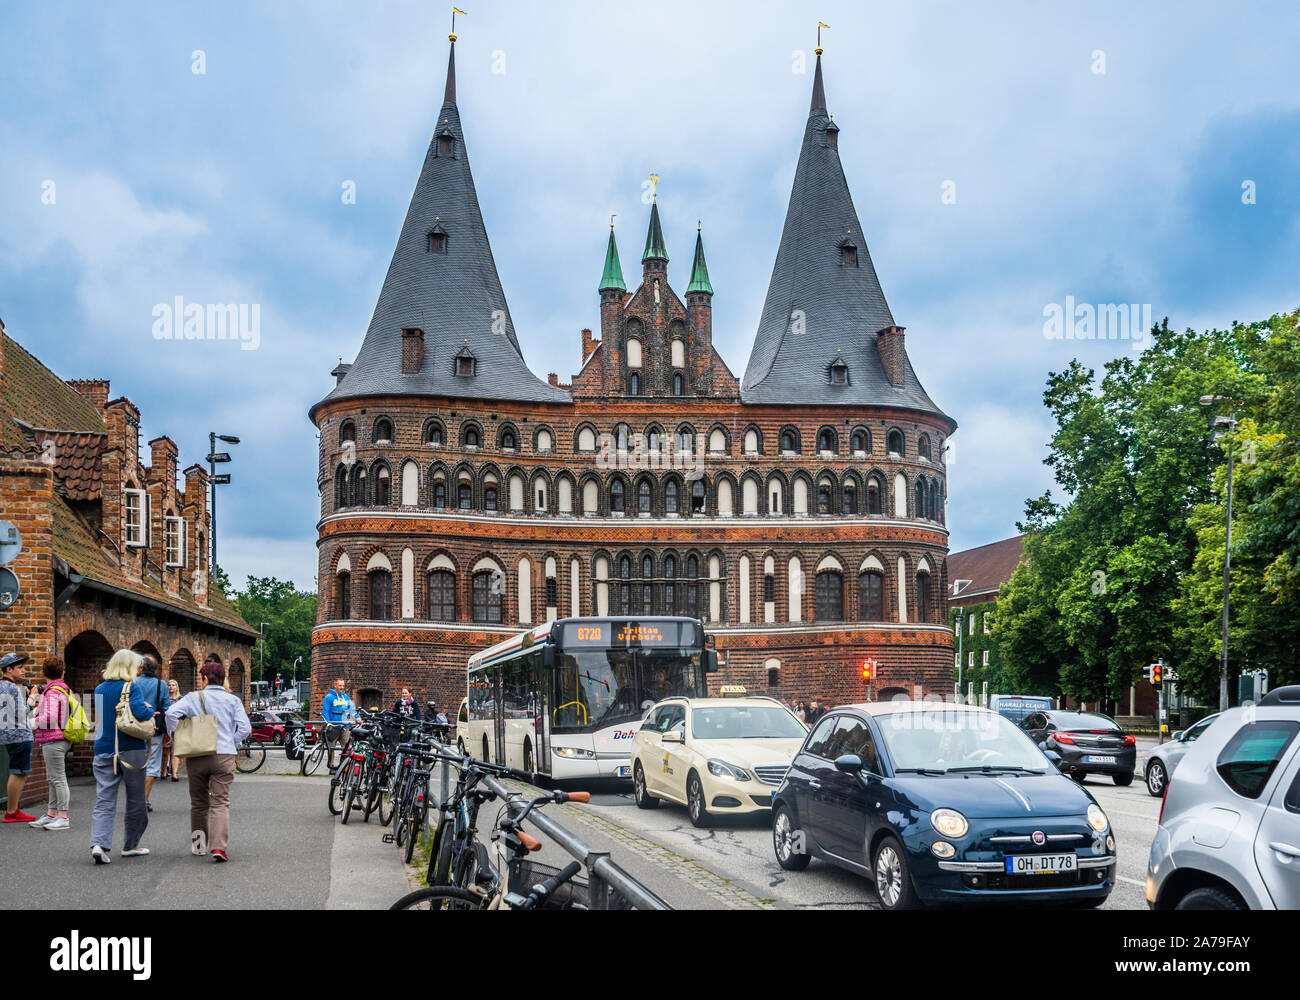 busy traffic at Lübeck's iconic Holstentor, Hanseatic City of Lübeck, Schleswig-Holstein, northern Germany Stock Photo